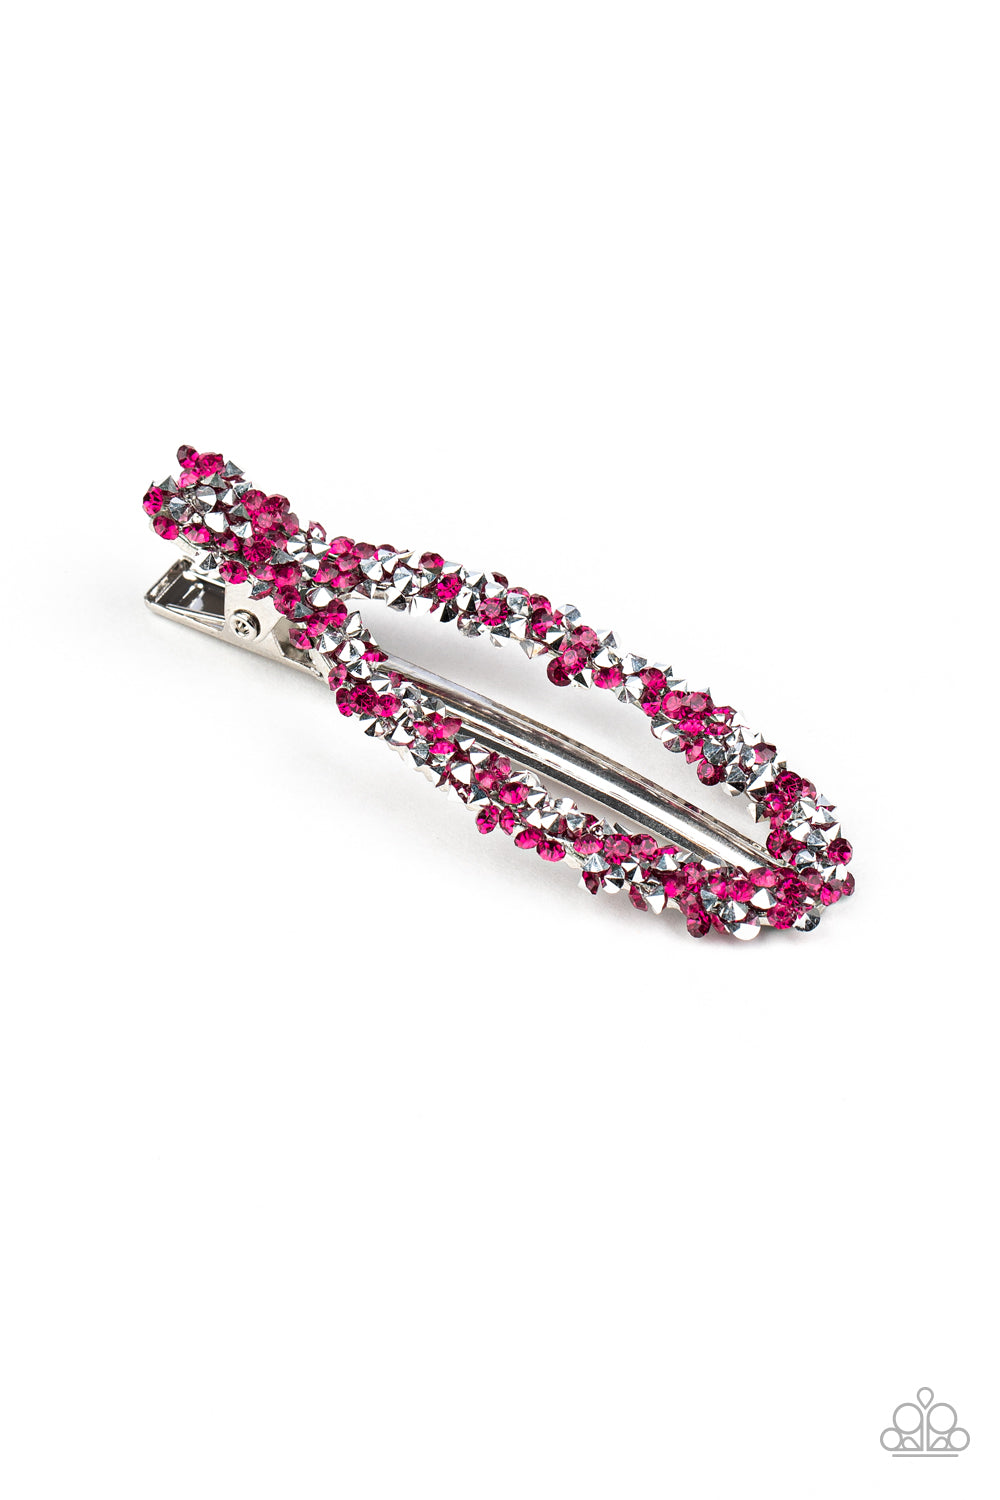 Paparazzi Jewelry & Accessories - HAIR We Go! - Pink Hair Clips. Bling By Titia Boutique